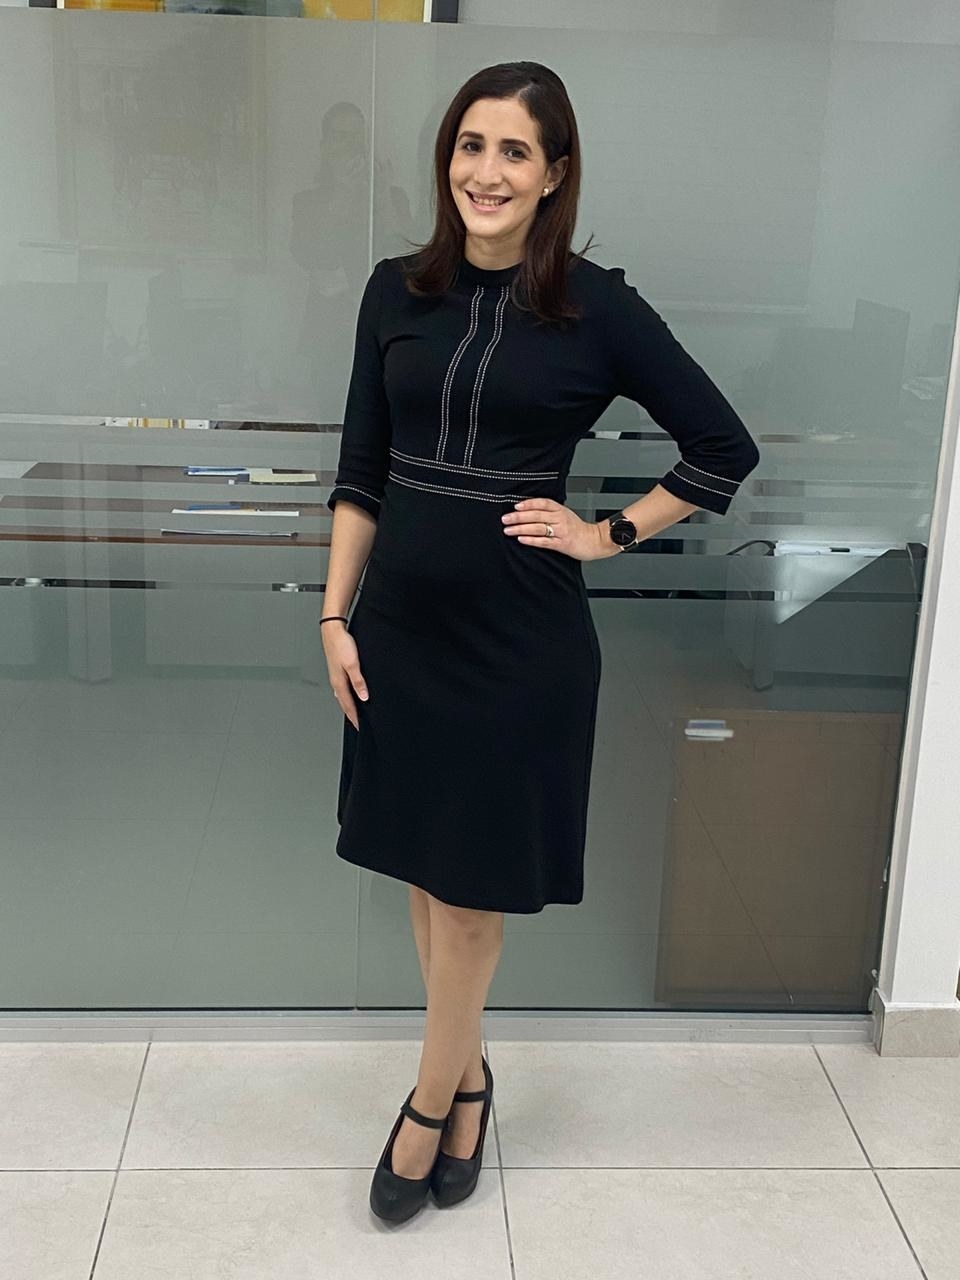 A reviewer wearing a black dress with black shoes